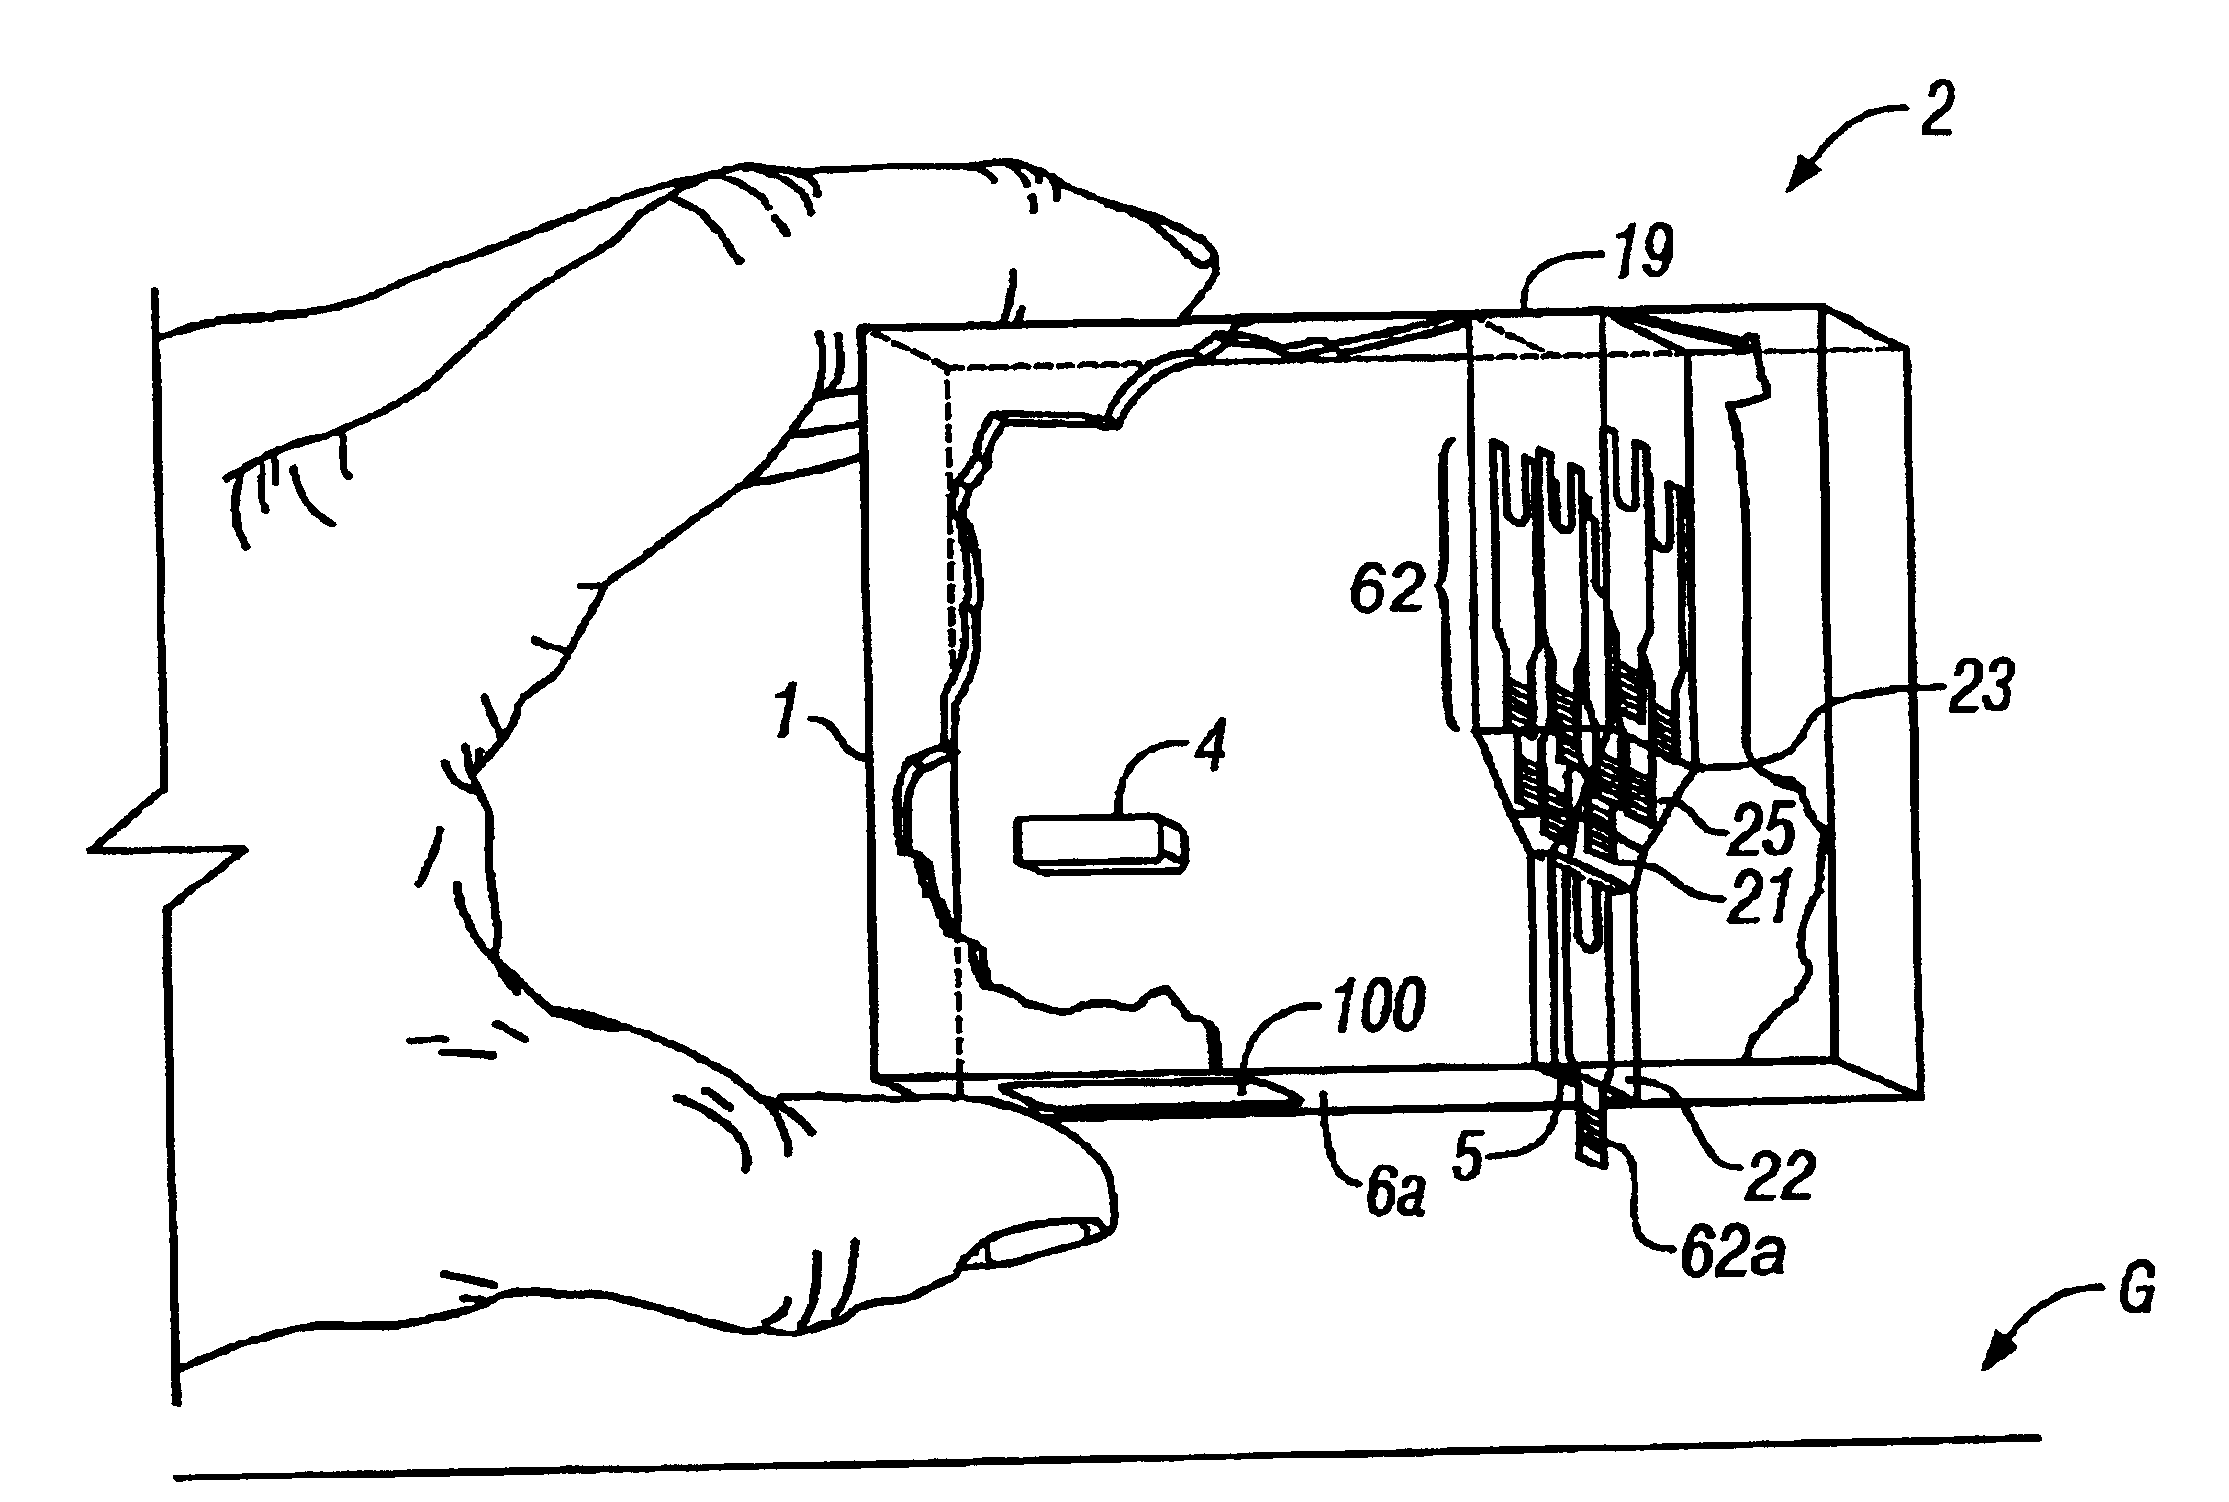 Analyte concentration determination meters and methods of using the same